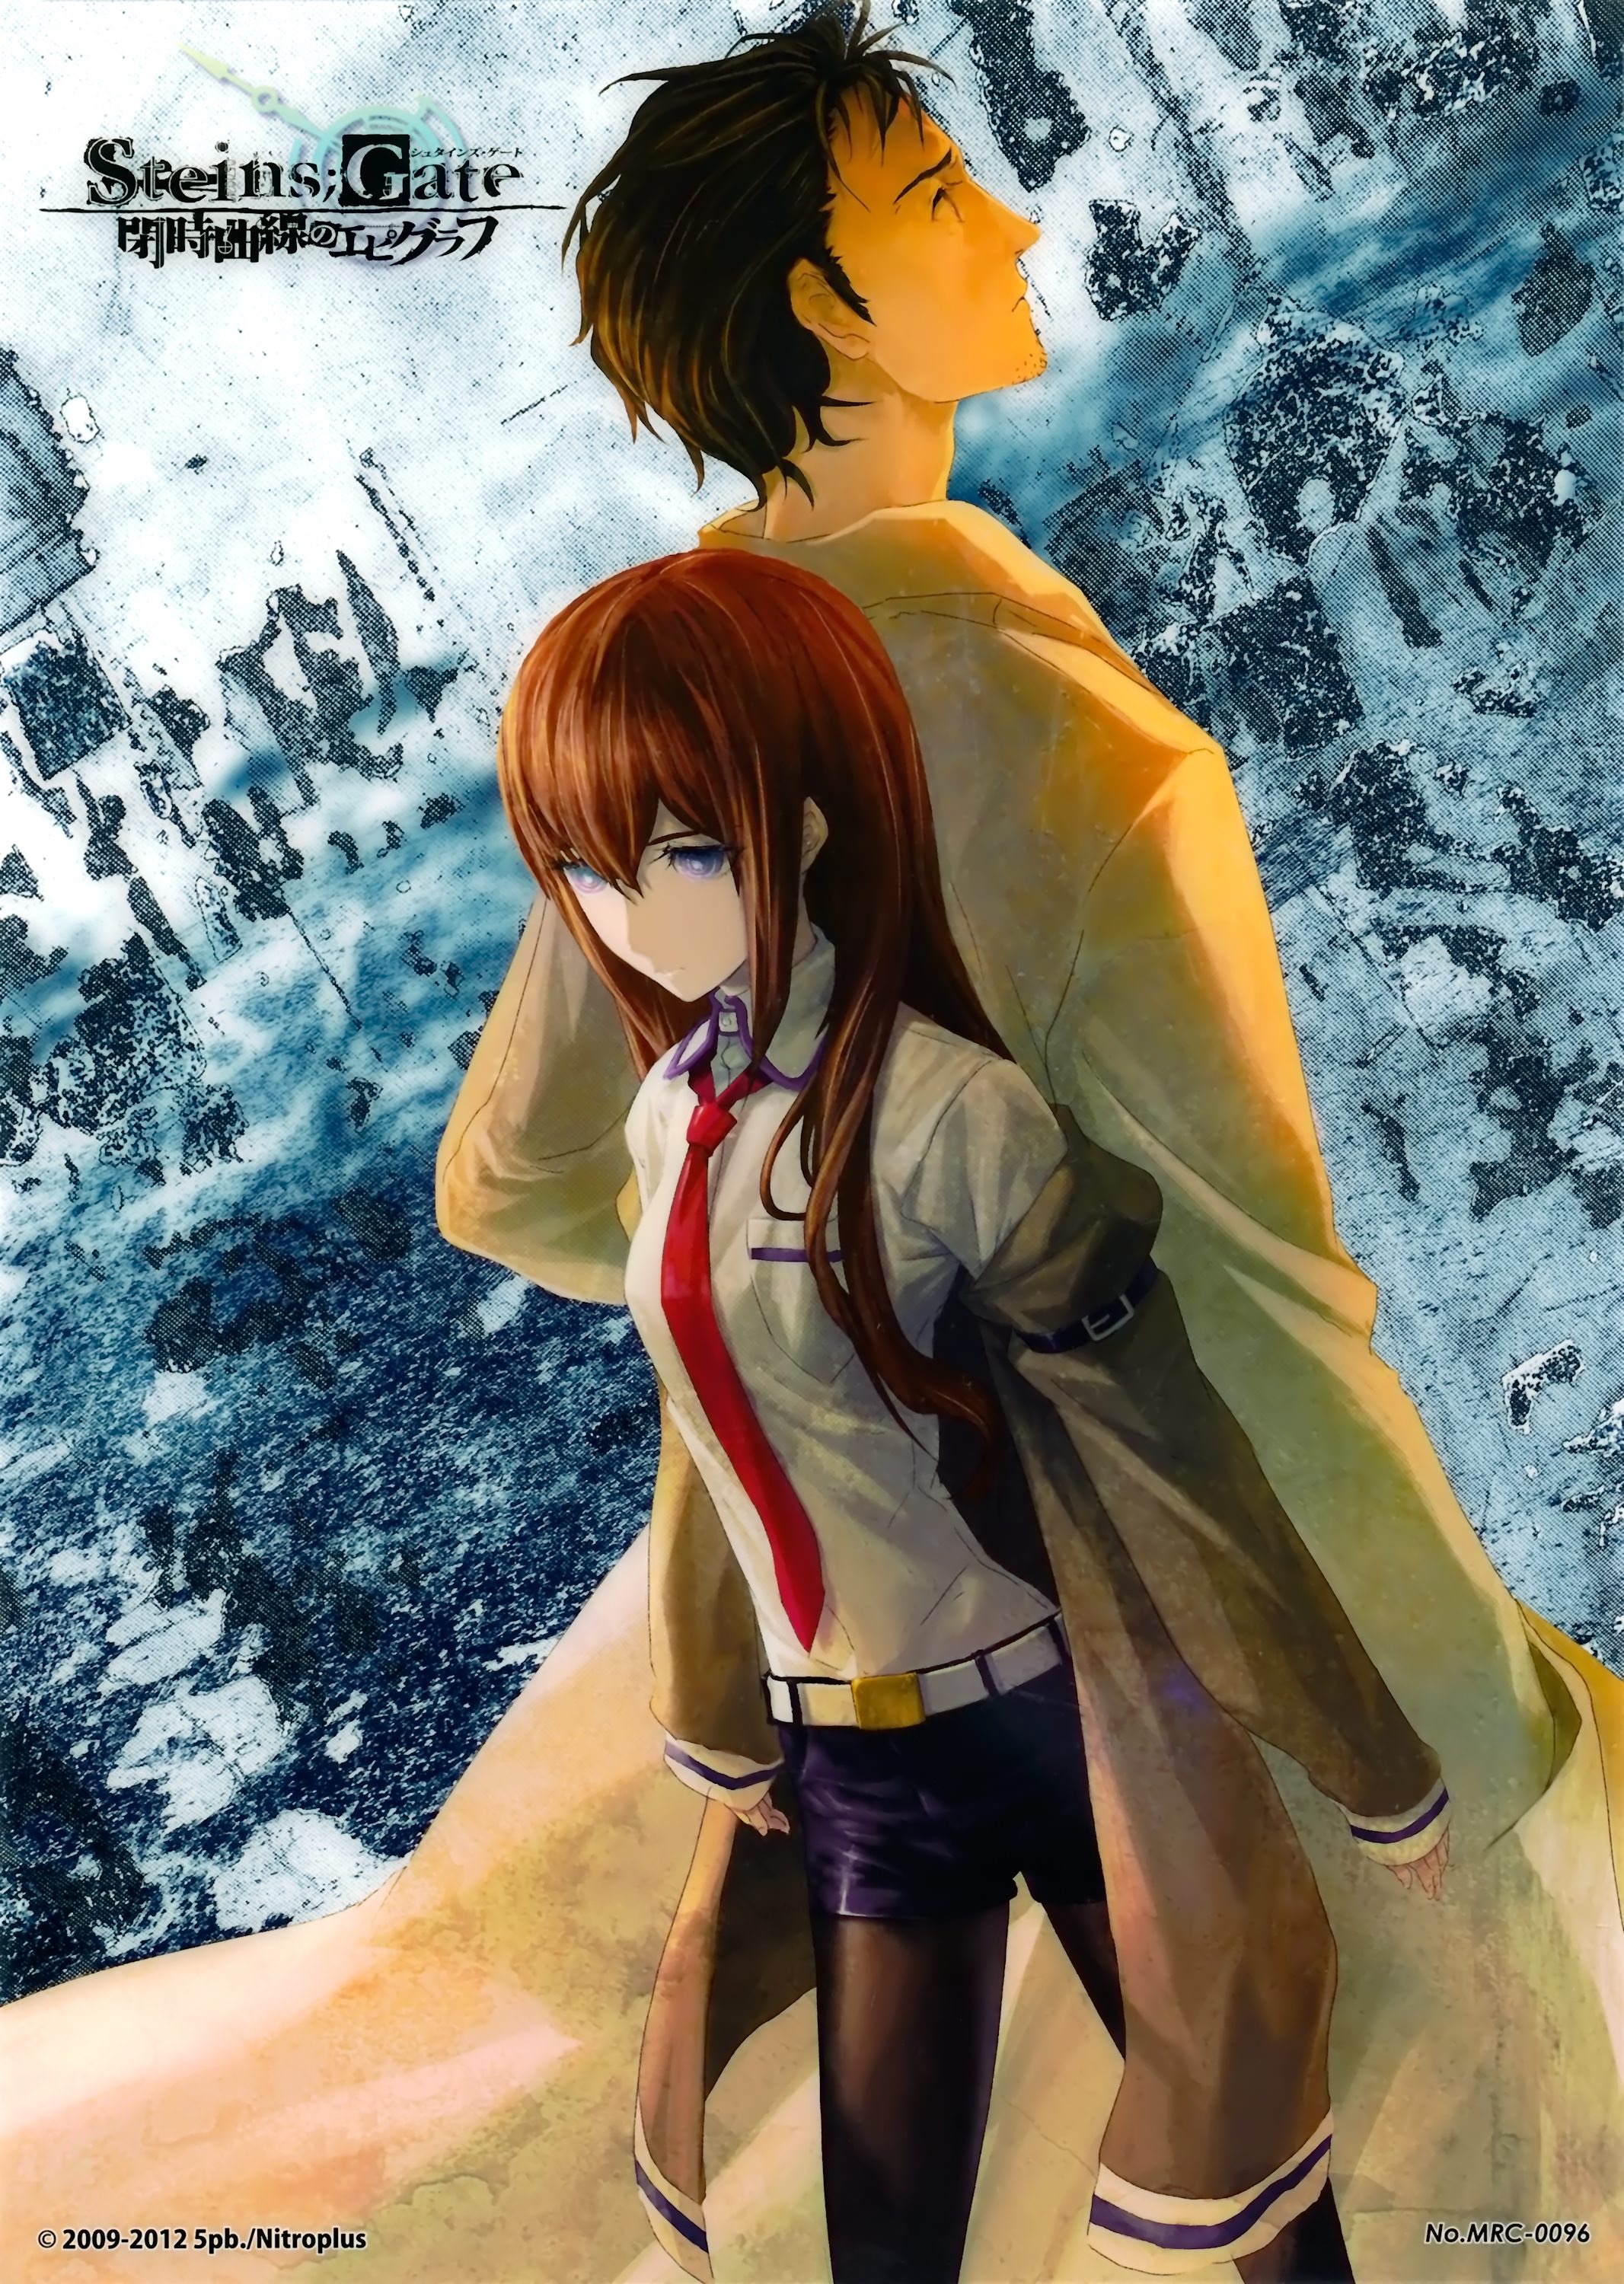 Images Of Steins Gate Japaneseclass Jp